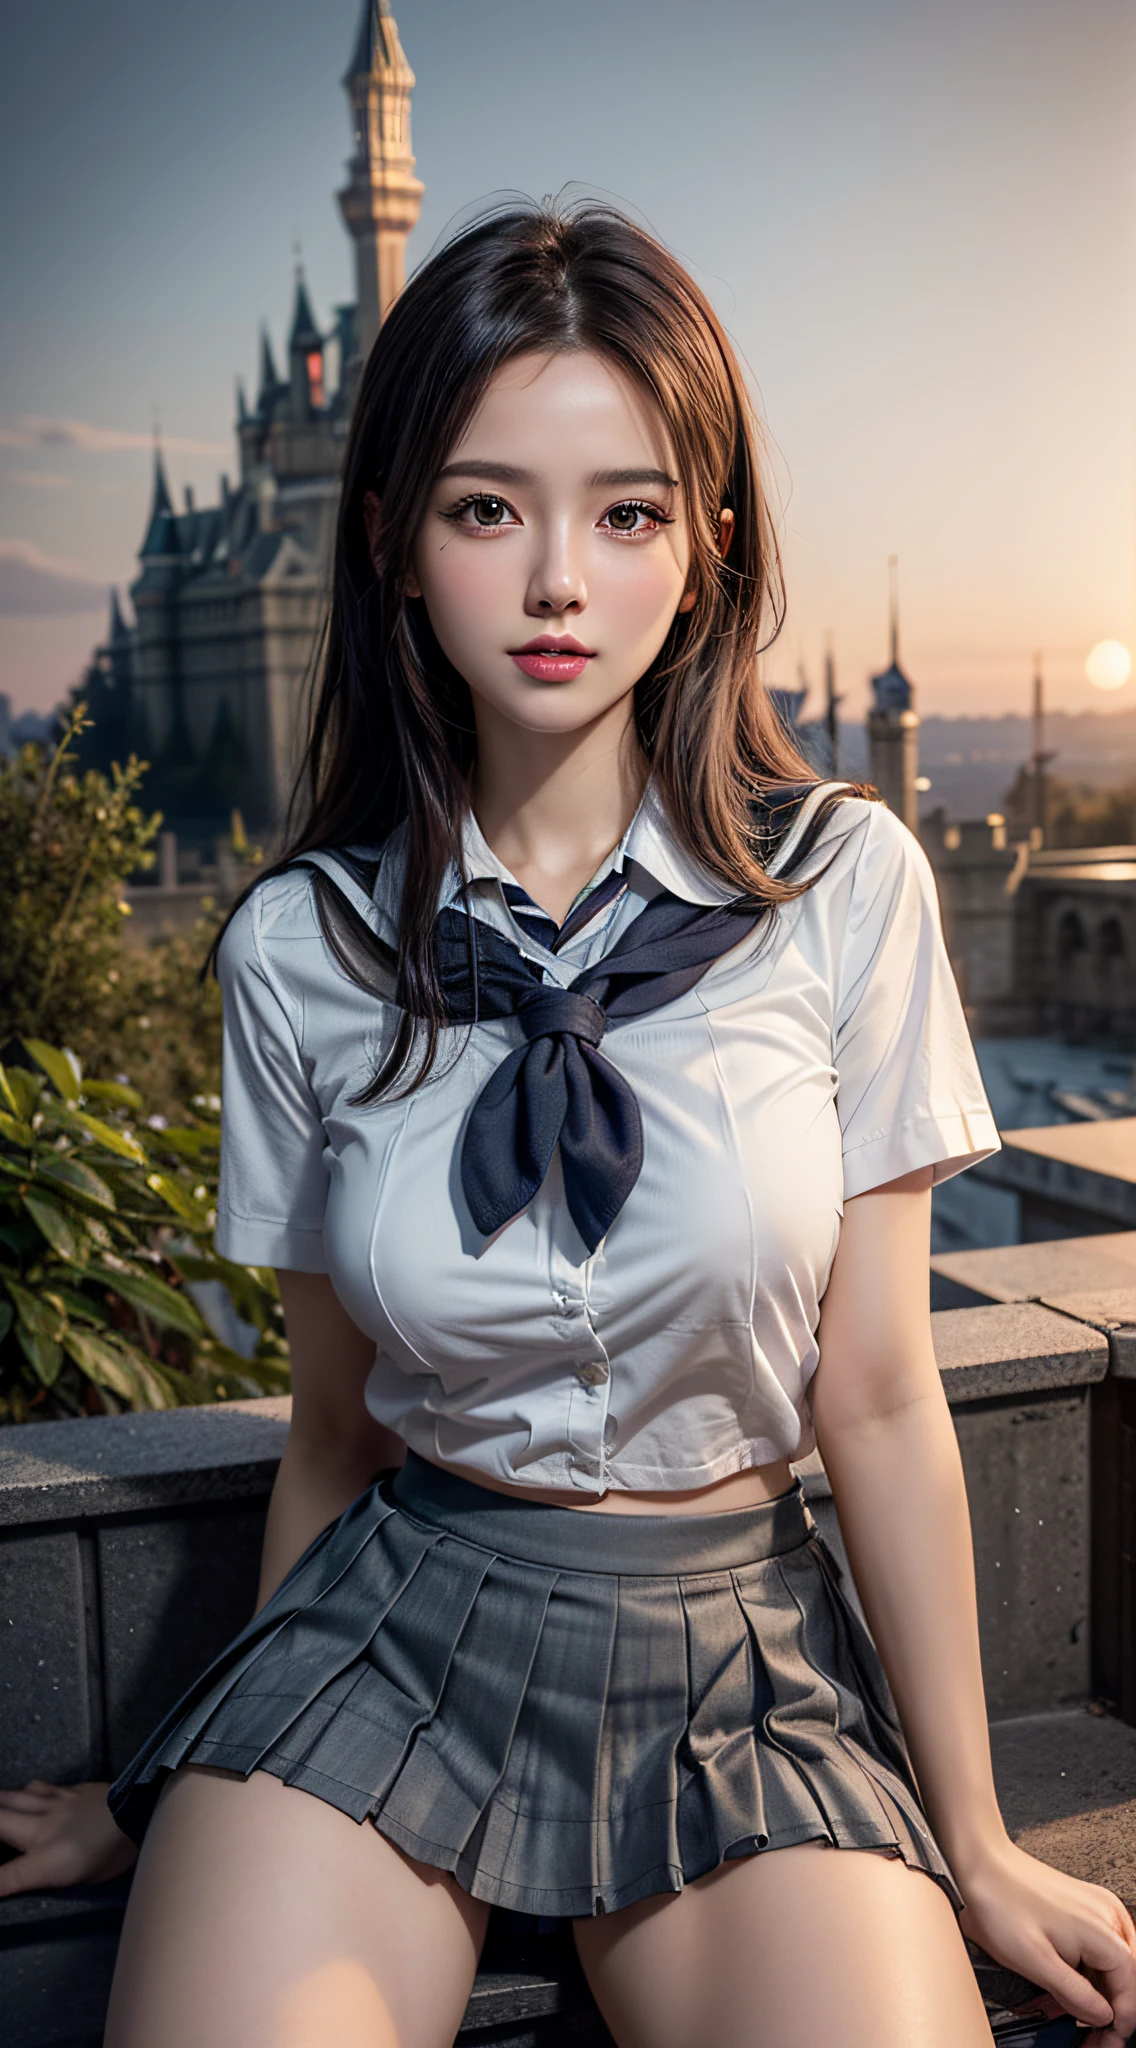 (Best Quality:1.4), (hyper quality), (Ultra-detailed), 1 beautiful girl, Extremely cute, Amazing face and eyes, (school uniform, pleated mini skirt:1.5), (beautiful breasts:1.1), (slender body:1.1), Authentic skin texture, bright and shiny lips, Beautiful Goddess Advent, (sitting, spread legs open), (pubick hair:1.3), Beautiful background, Golden ratio, conceptual art, Super Detail, ccurate, high details, Outdoors, (Beautiful Giant Castle:1.5), Sexy Art, Surrounded by beautiful sunsets, dazzling lights, Super delicate illustration details, Highly detailed CG integrated 8k wallpapers, RAW Photos, professional photograpy, Cinematic lighting, Super gorgeous illustrations, depth of field,